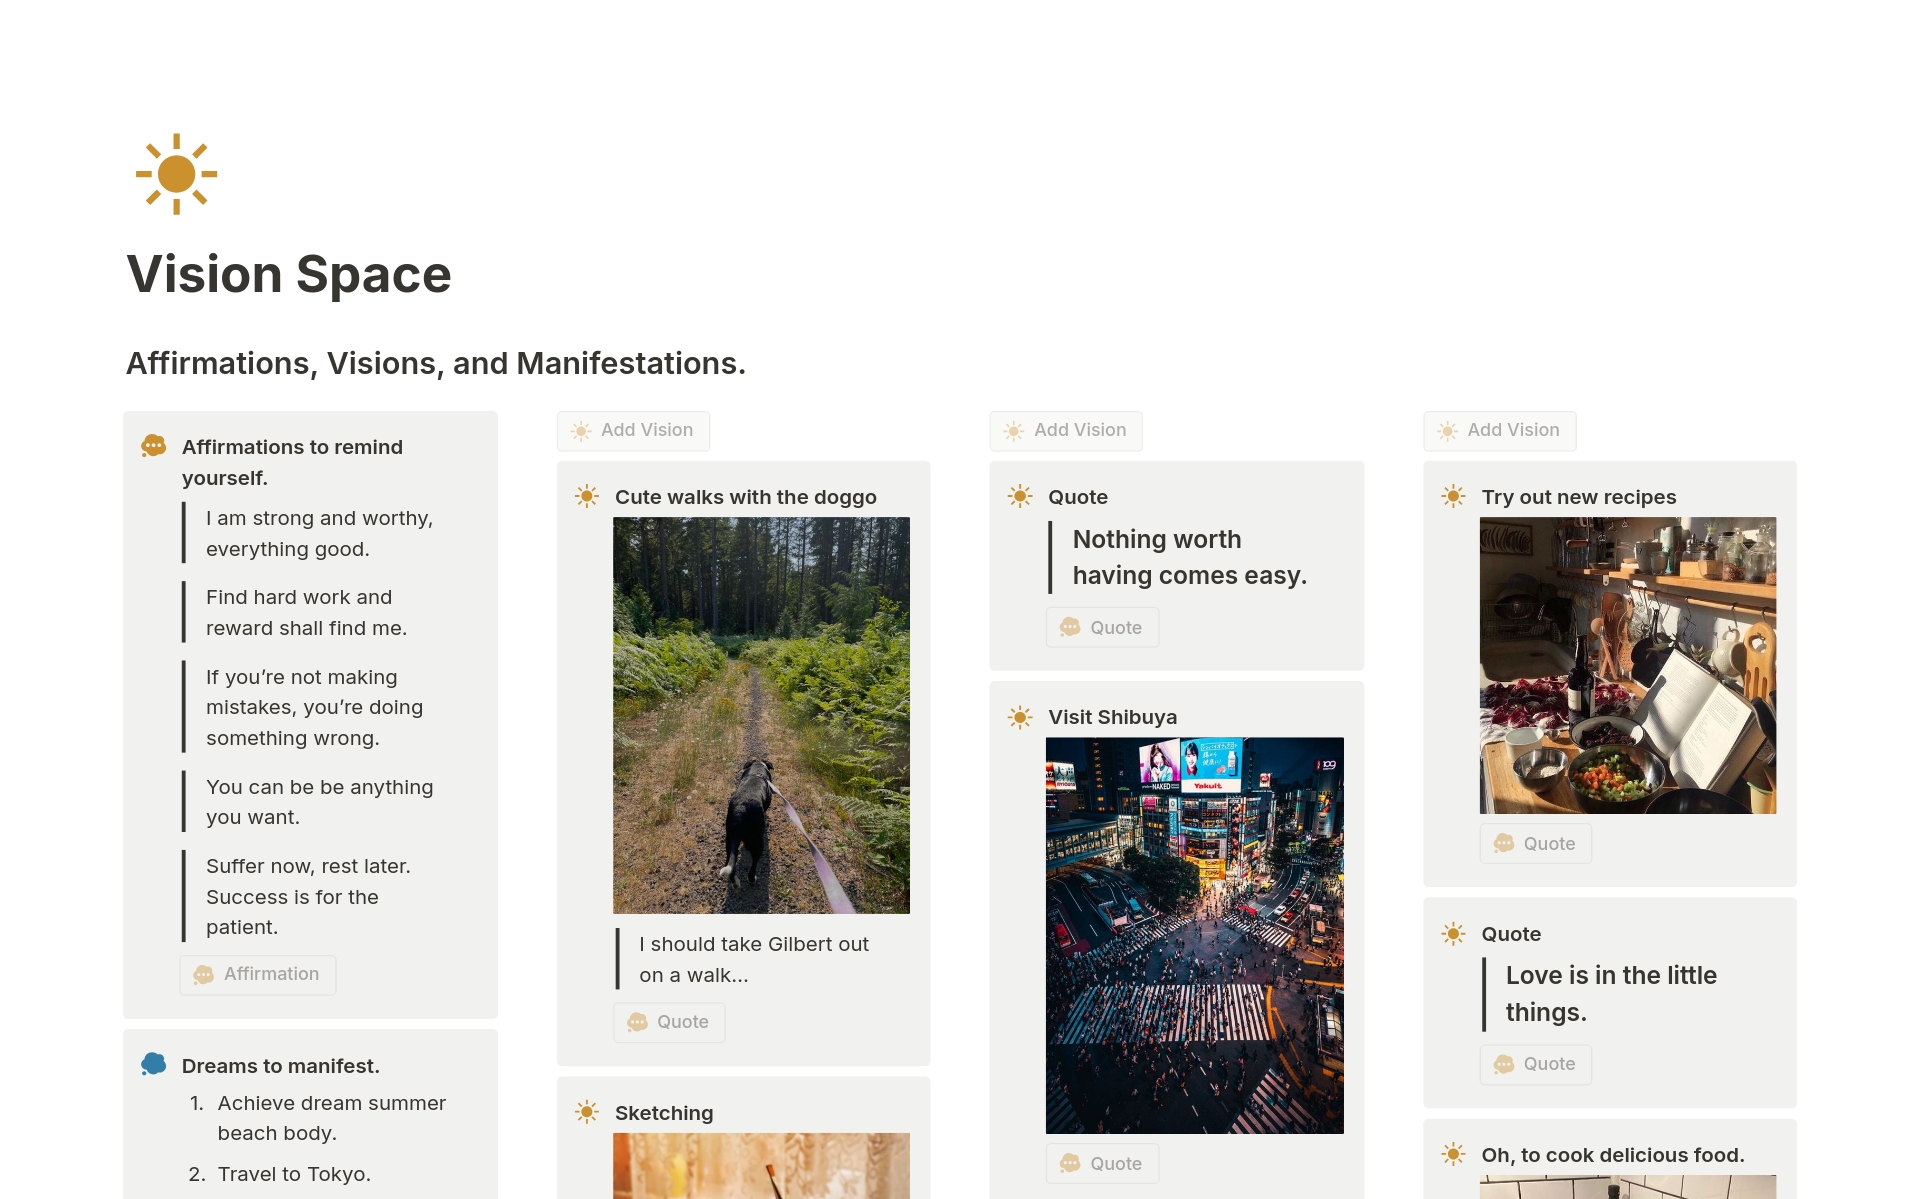 Vision Space is a simple, easy-to-use Pinterest-style vision board made in Notion. Built to cater to your spiritual and mental health, Vision Space lets you jot down your affirmations, personal manifestations, and visions.